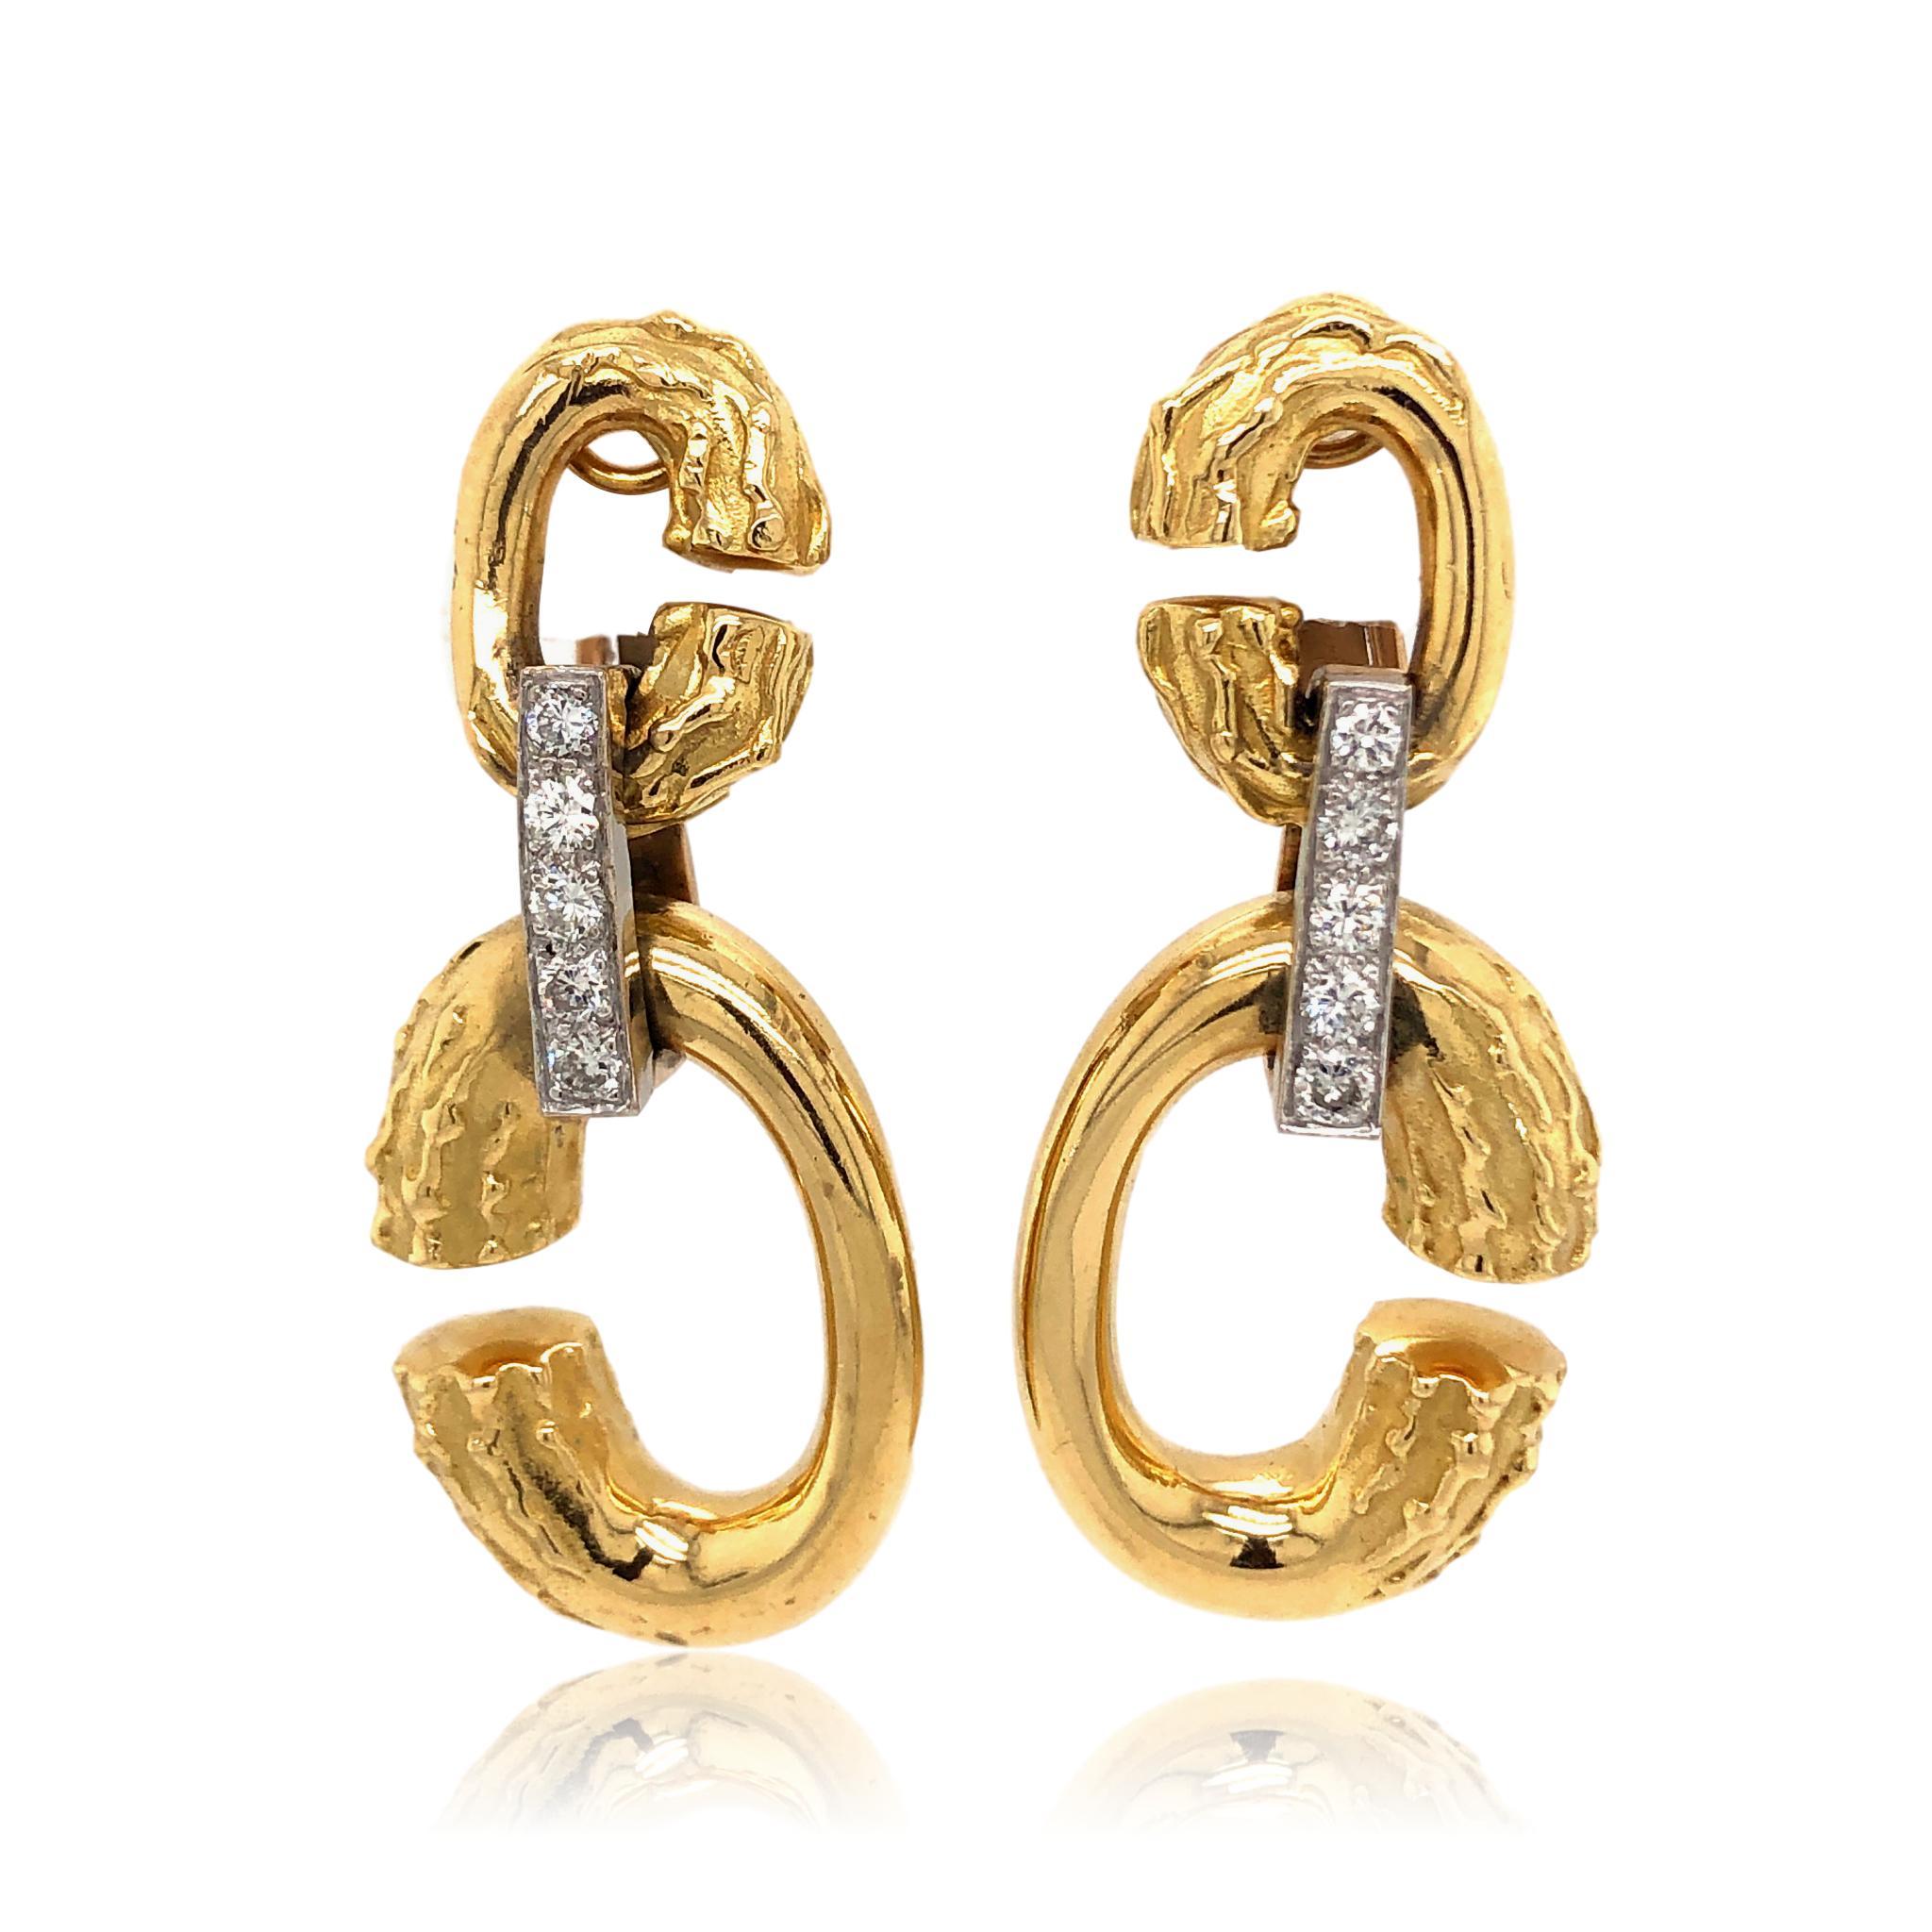 1970's Gold and DIamond drop earclips by Kutchinsky. The 18k yellow gold 1 7/8